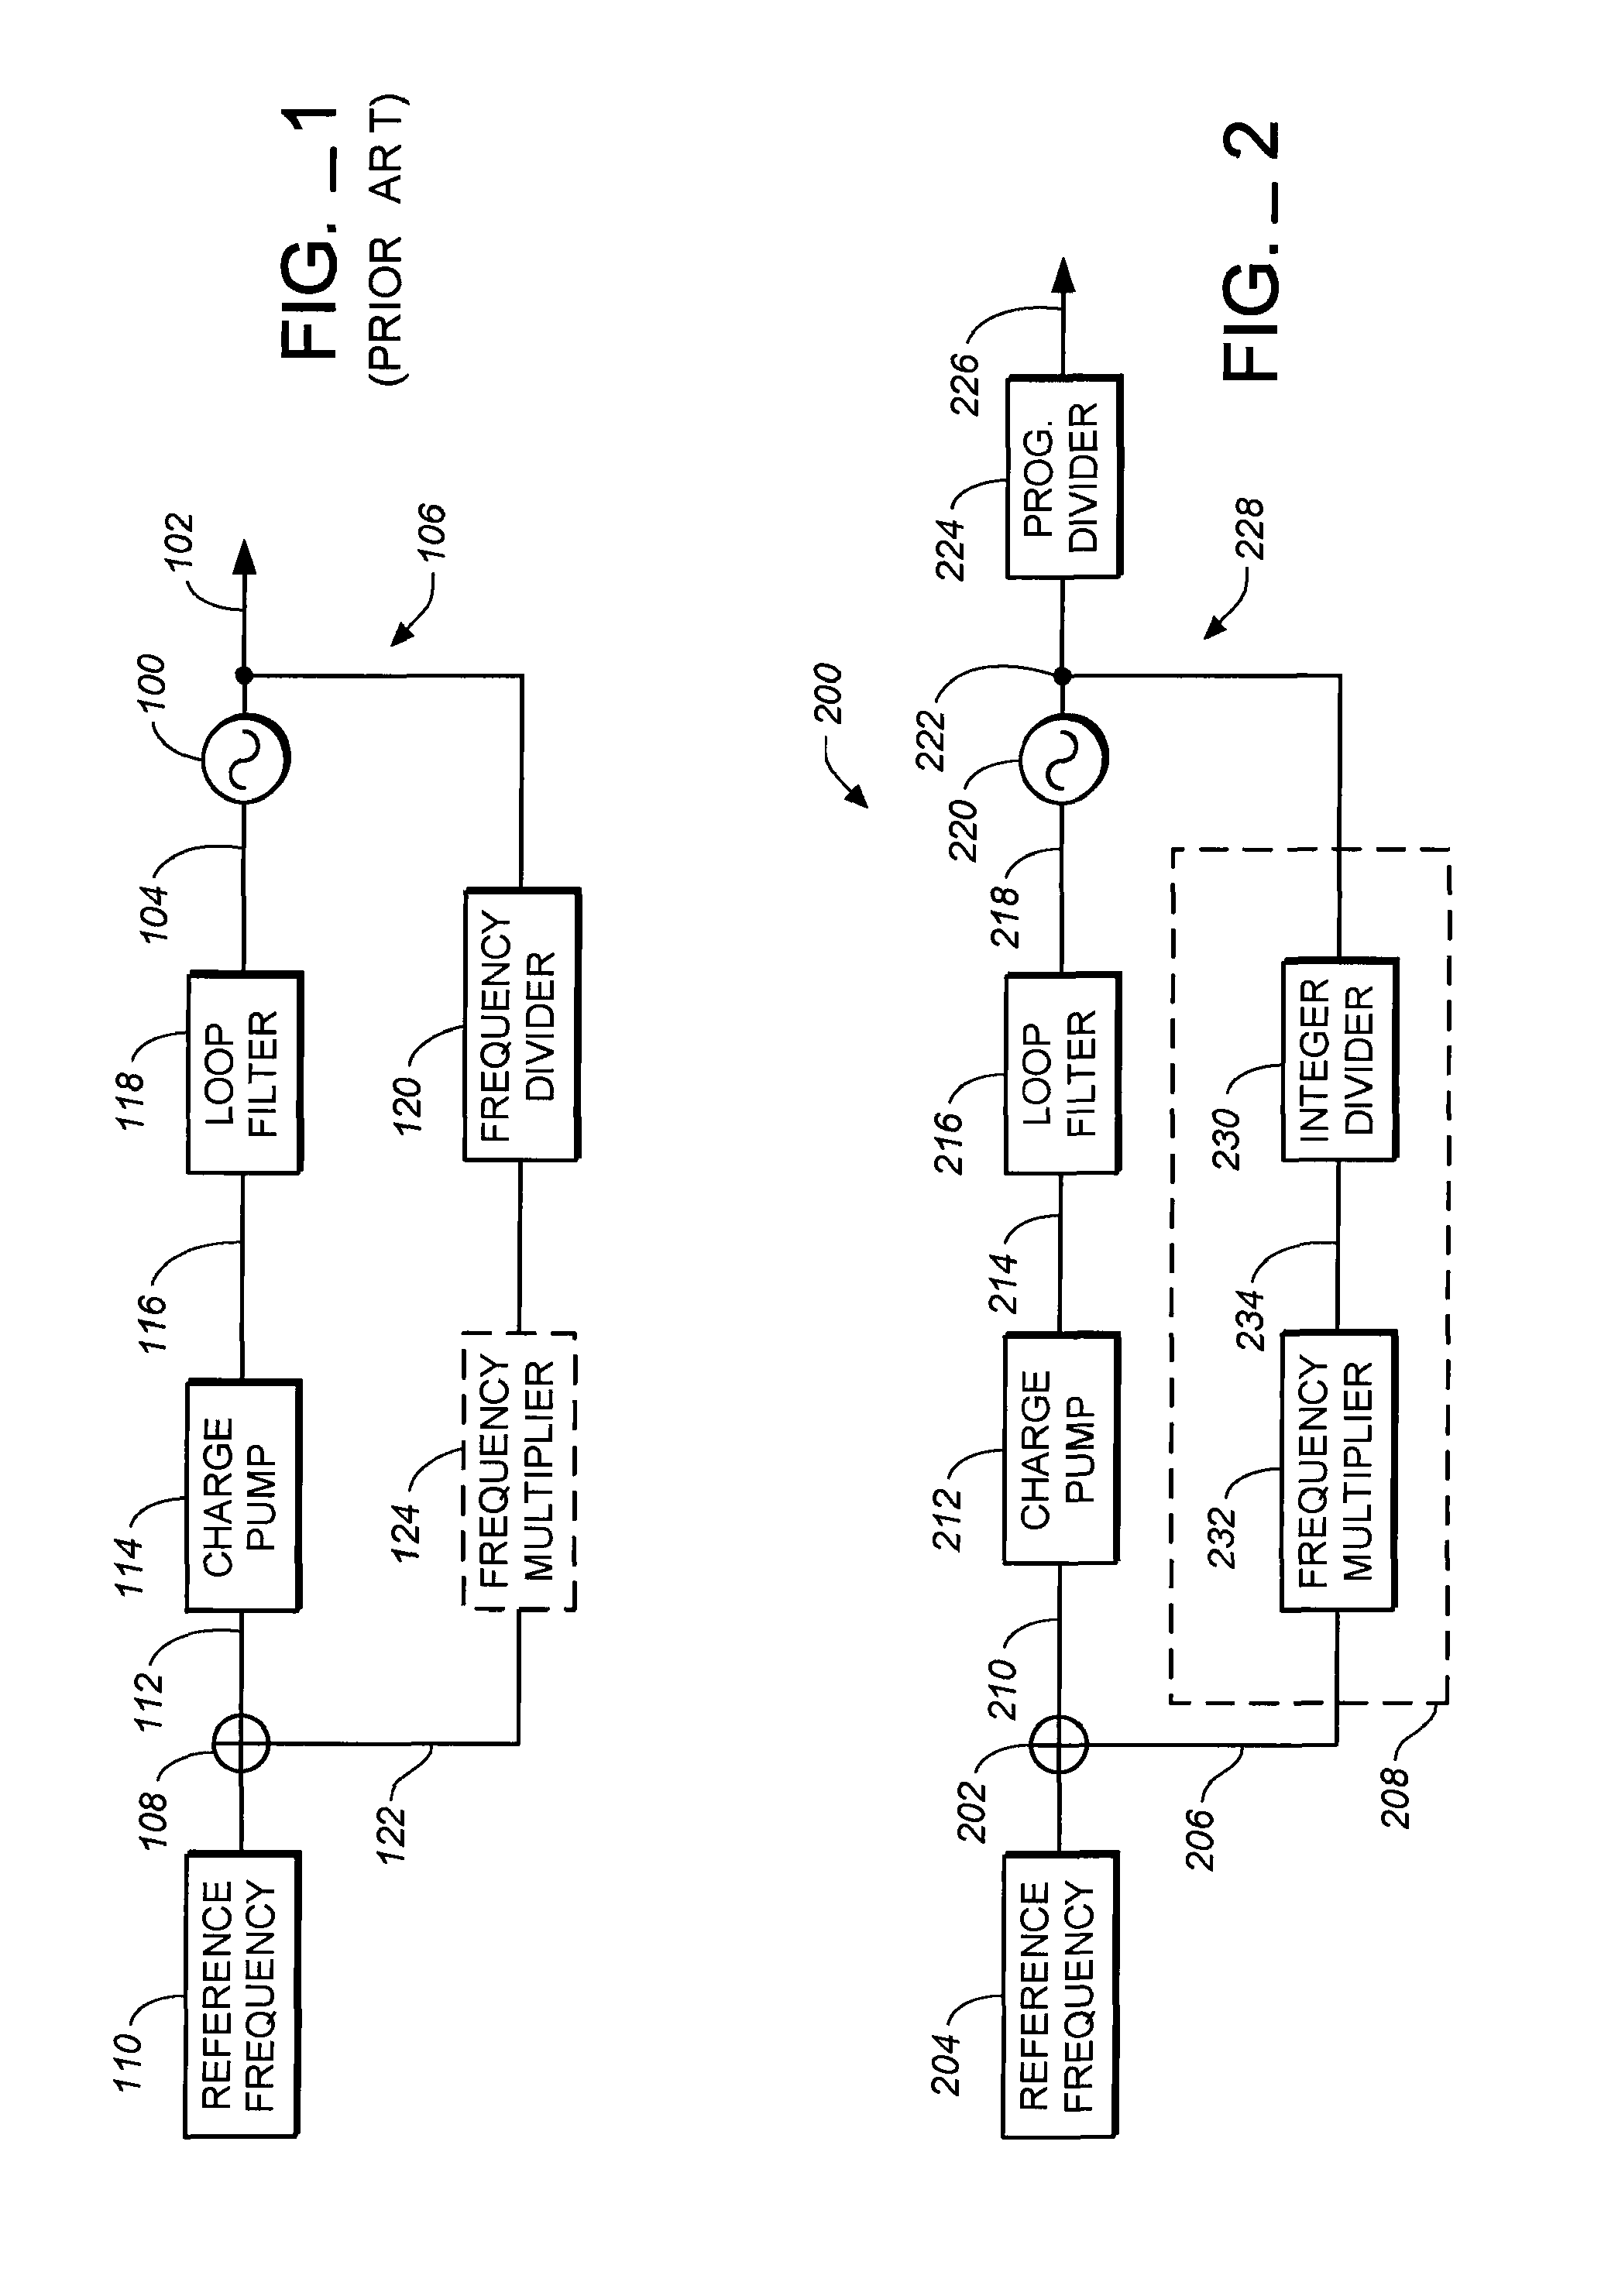 High bandwidth phase locked loop (PLL) with feedback loop including a frequency divider